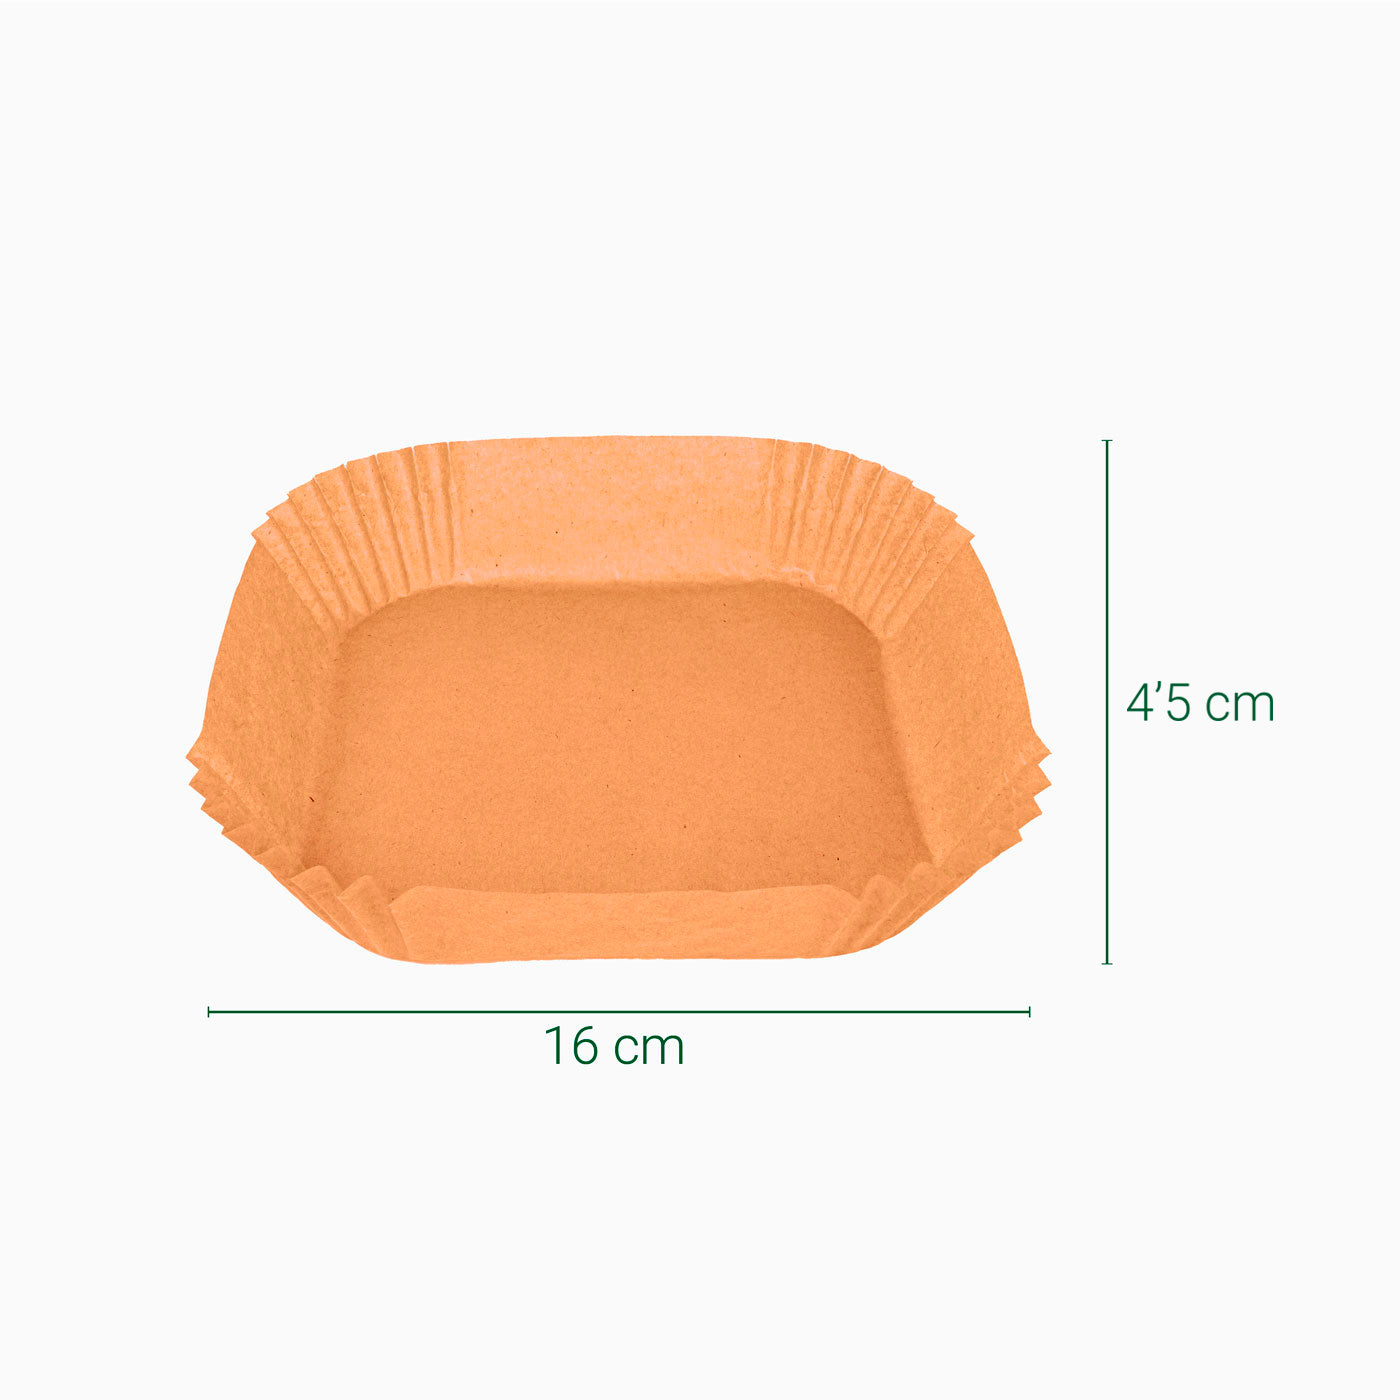 Papel Siliconed Mold Square Airfryer 16 x 16 x 4,5 cm